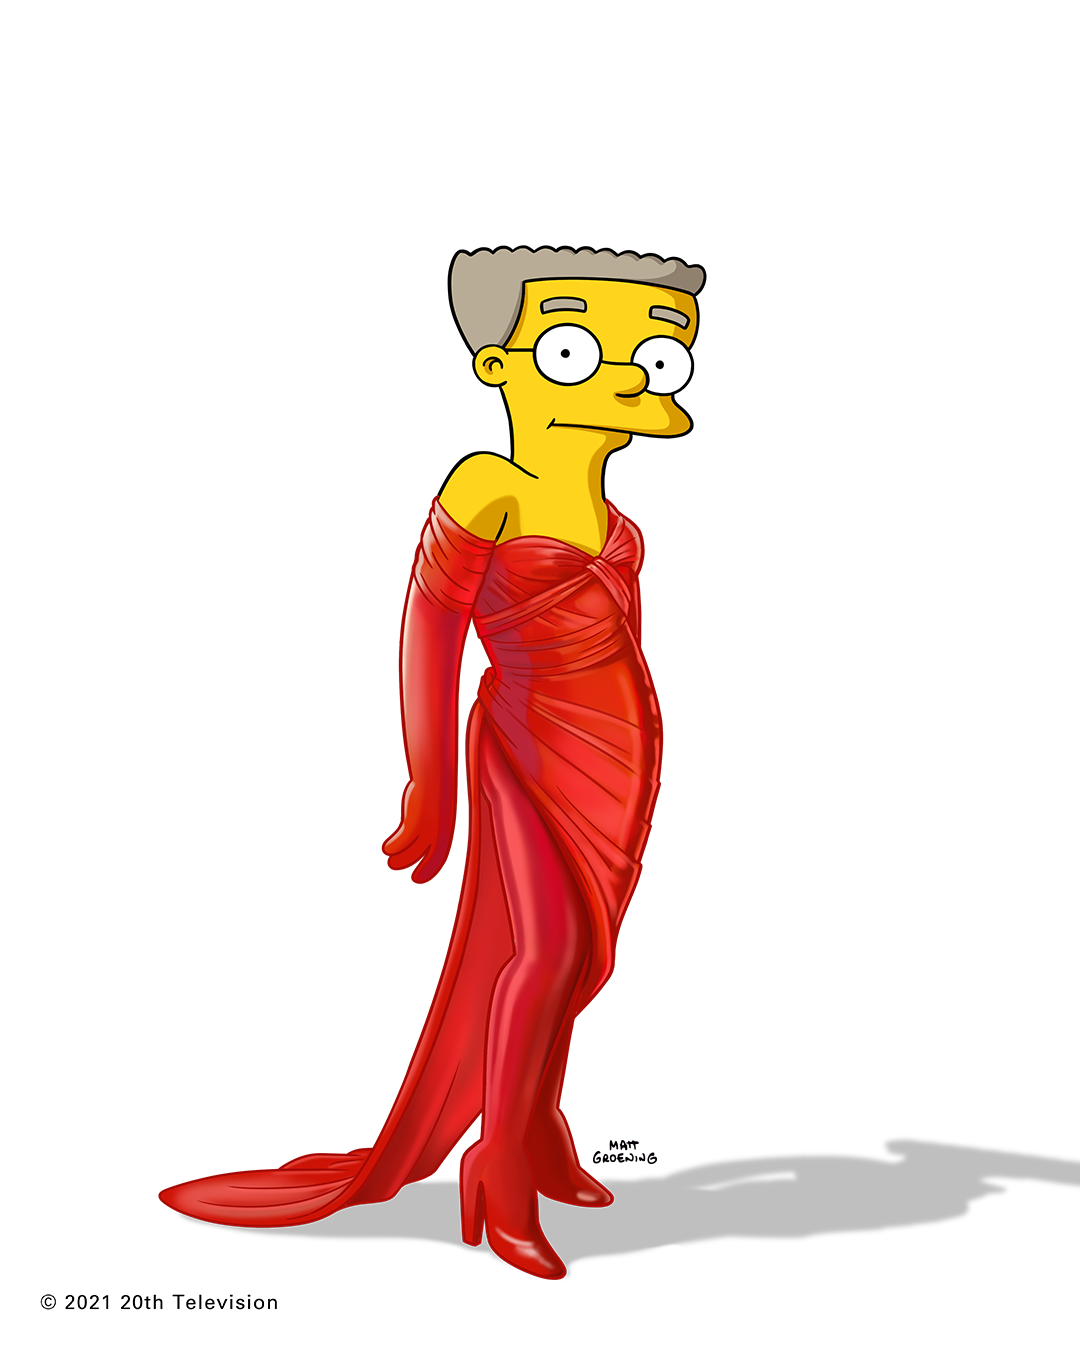 Simpsons_Balenciaga_Smithers_4x5_1080x1350_01.png